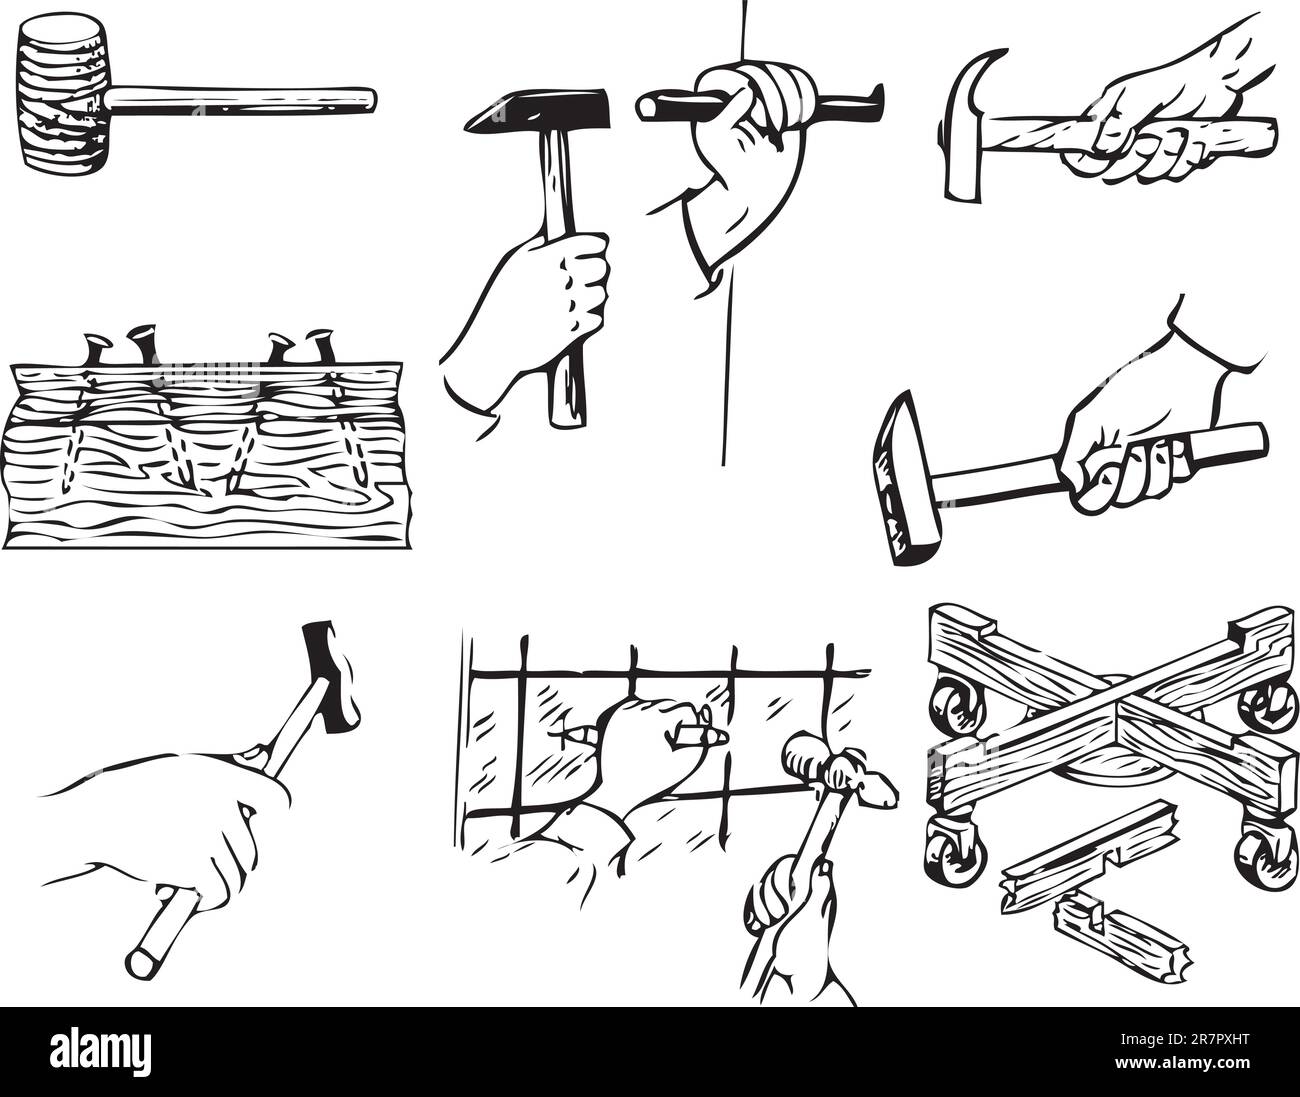 Tools related to work with hammers. Vector illustration of a format EPS. Stock Vector